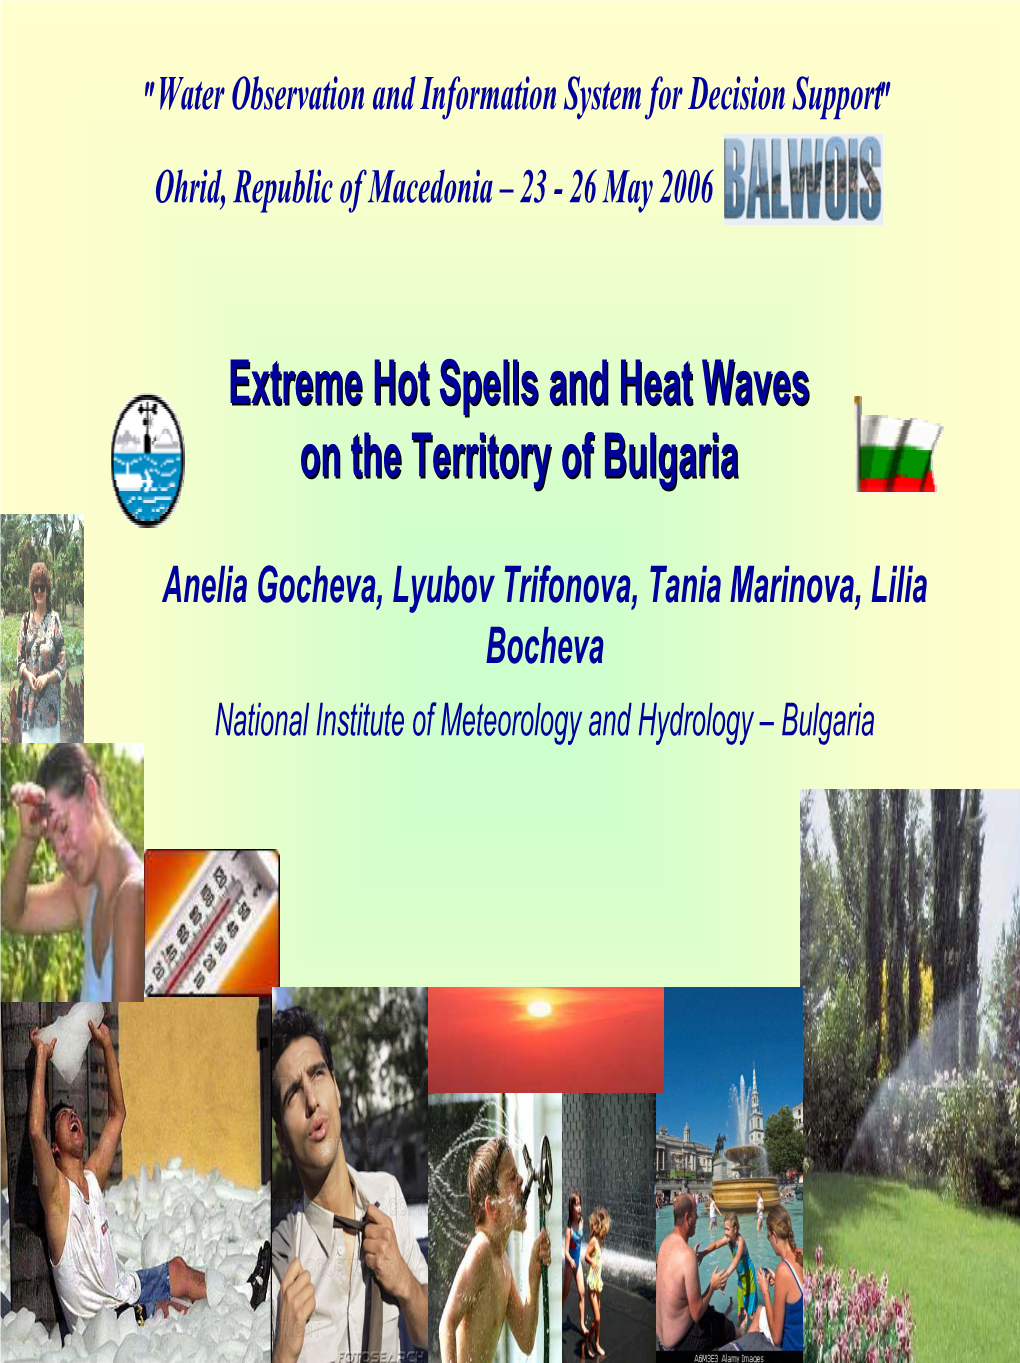 Extreme Hot Spells and Heat Waves on the Territory of Bulgaria